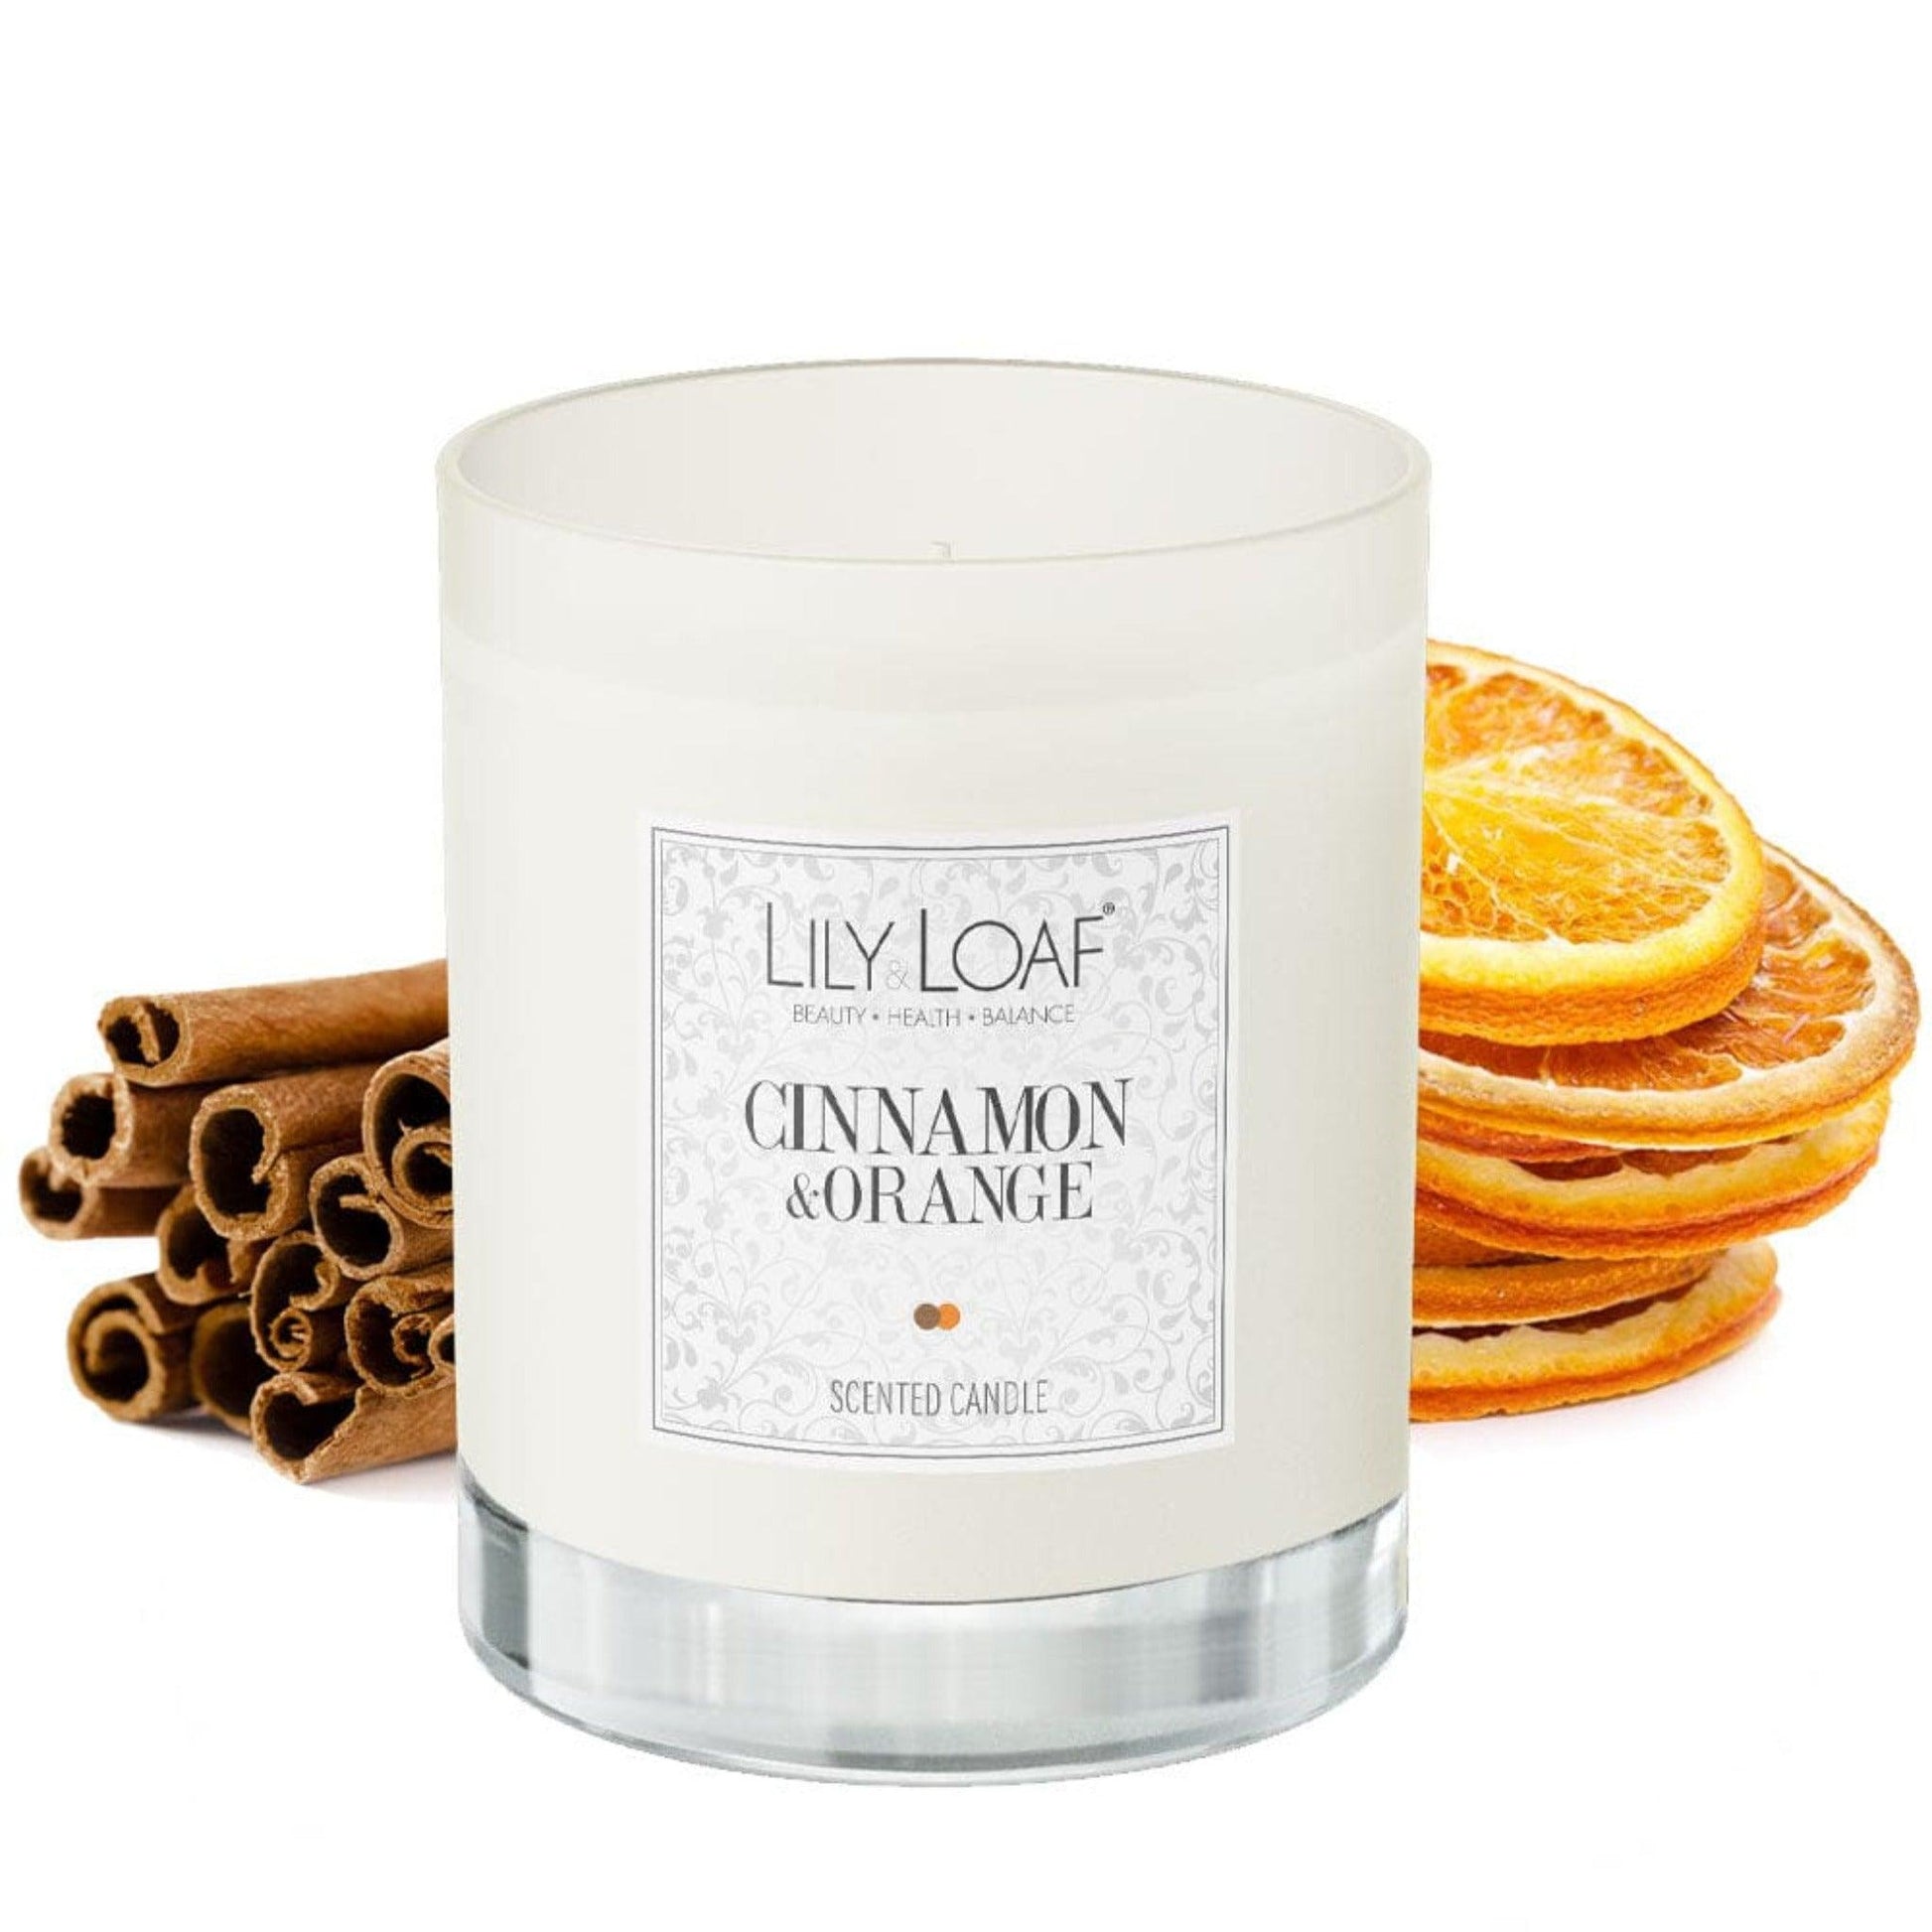 Lily & Loaf Cinnamon and Orange Soy Wax Candle surrounded by cinnamon sticks and orange slices depicting the botanical fragrance